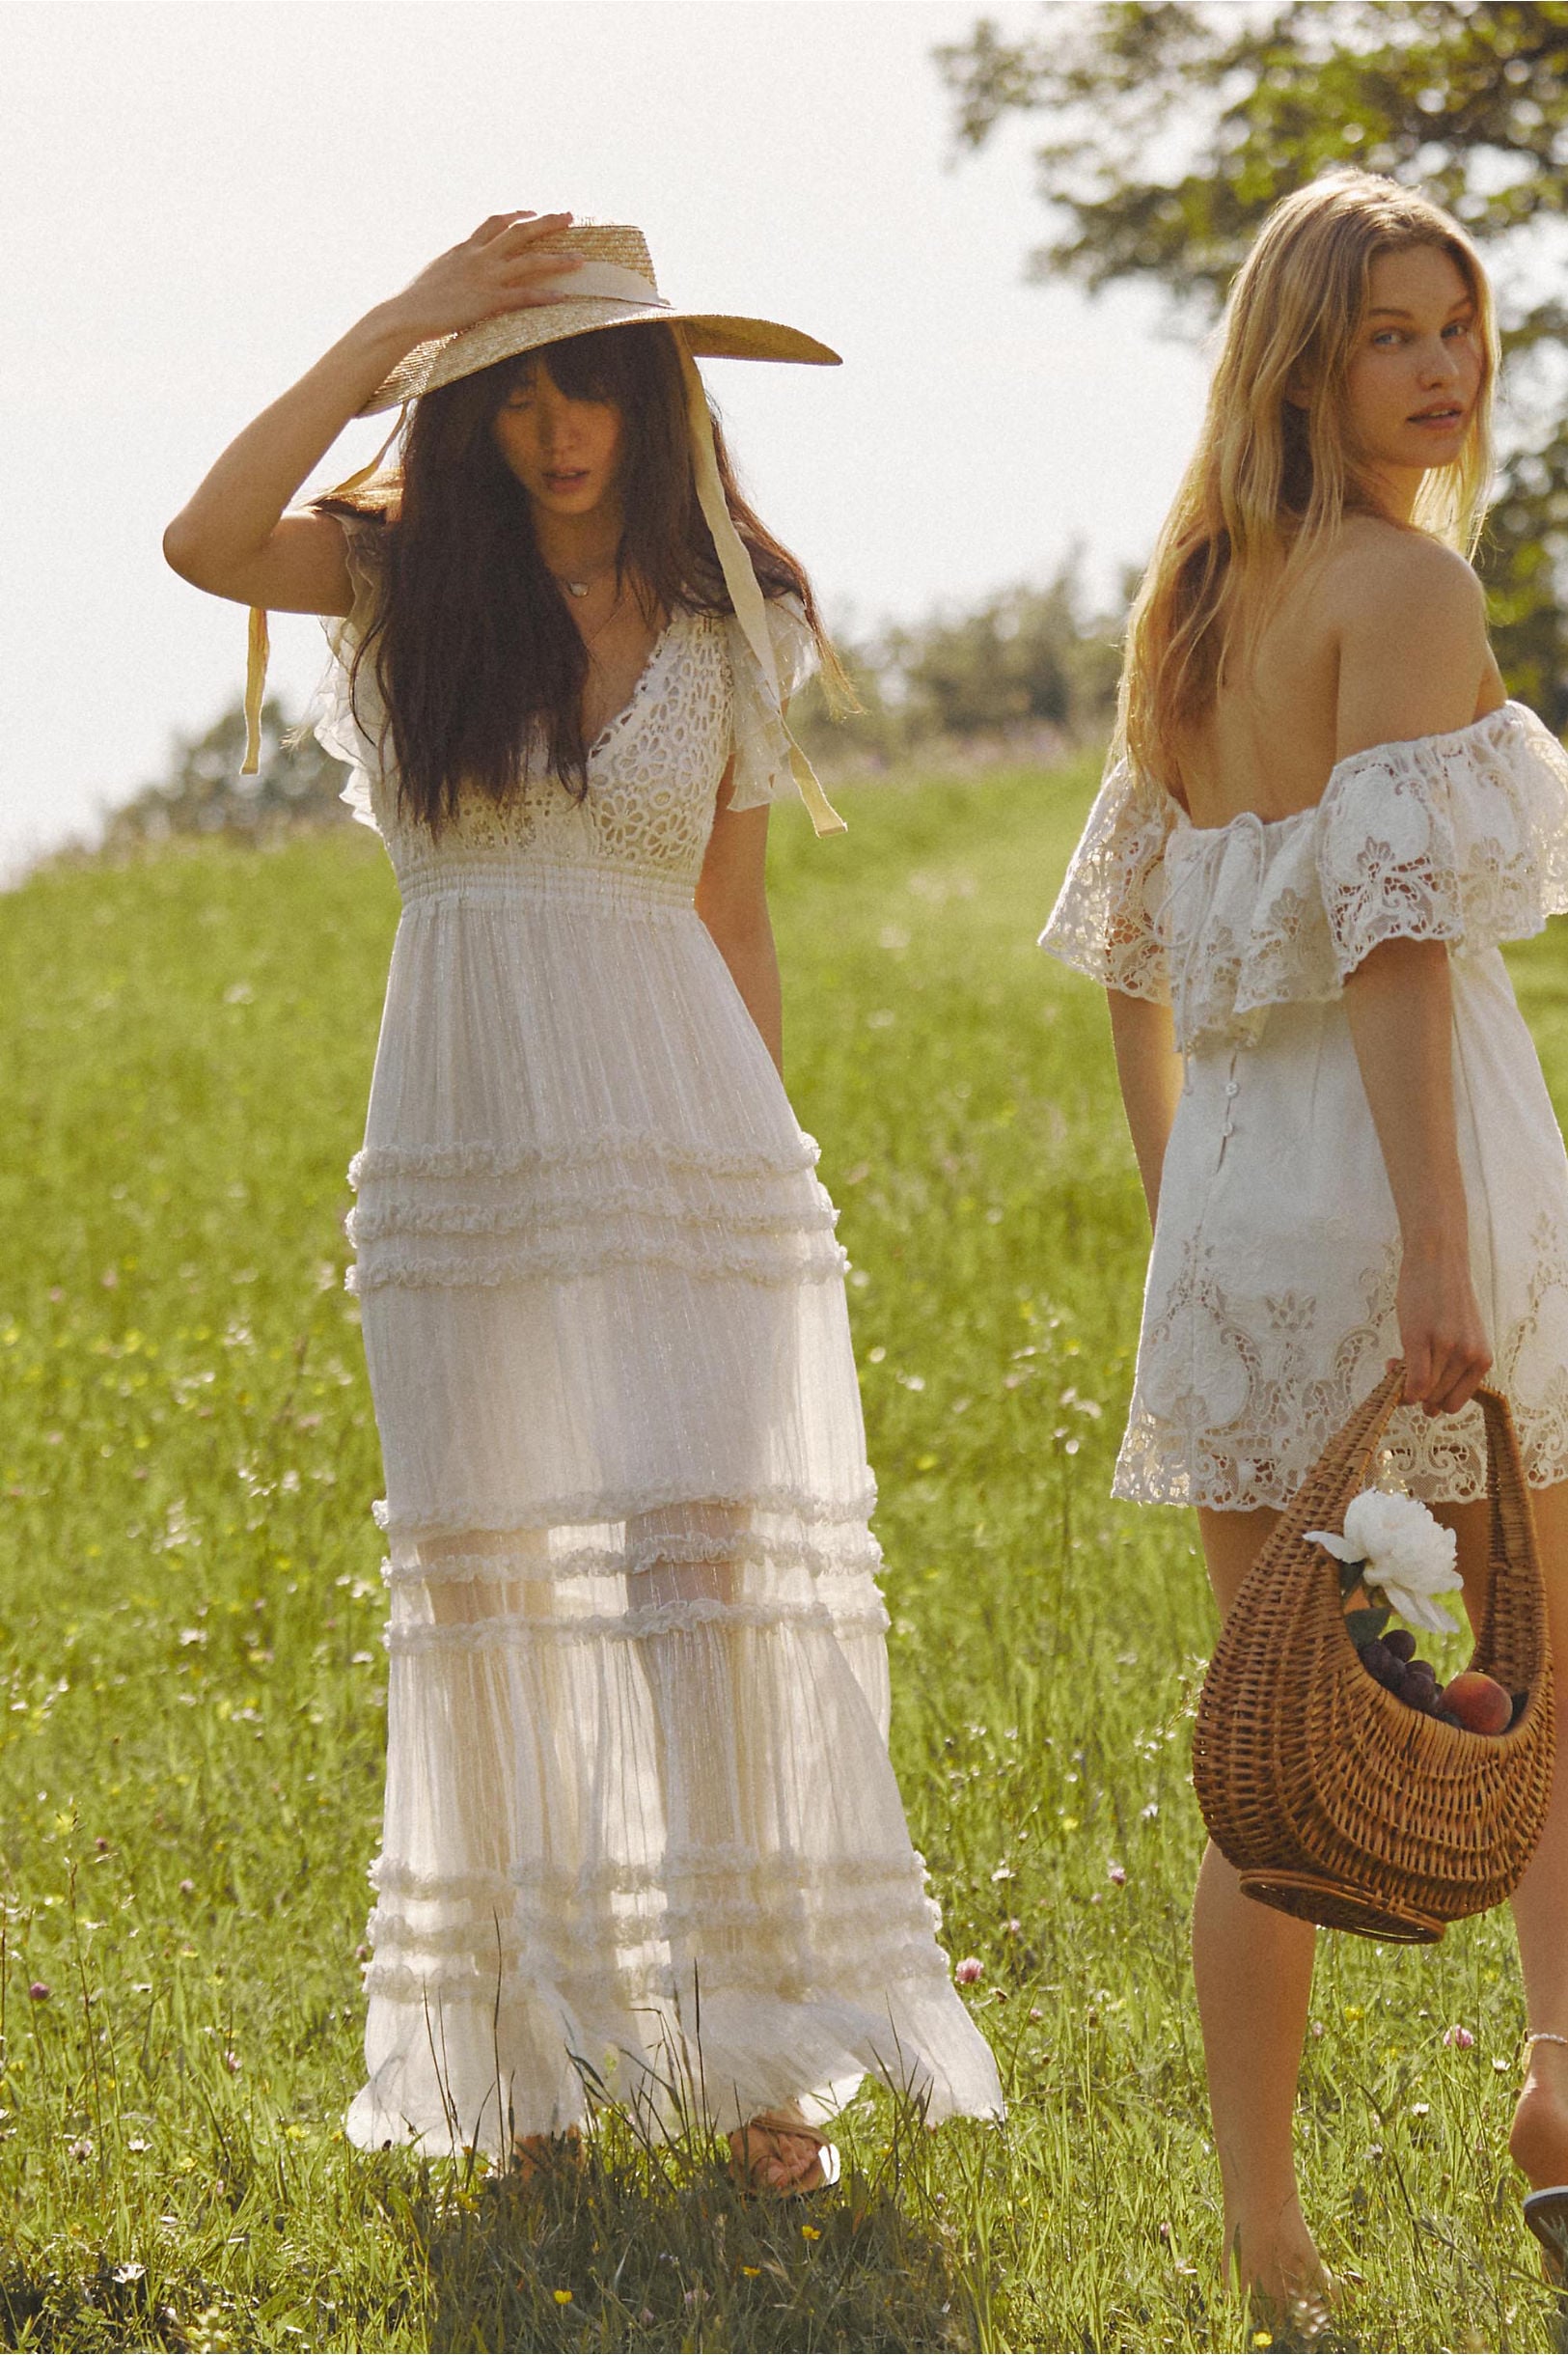 Free People – Boho Clothing by Free People